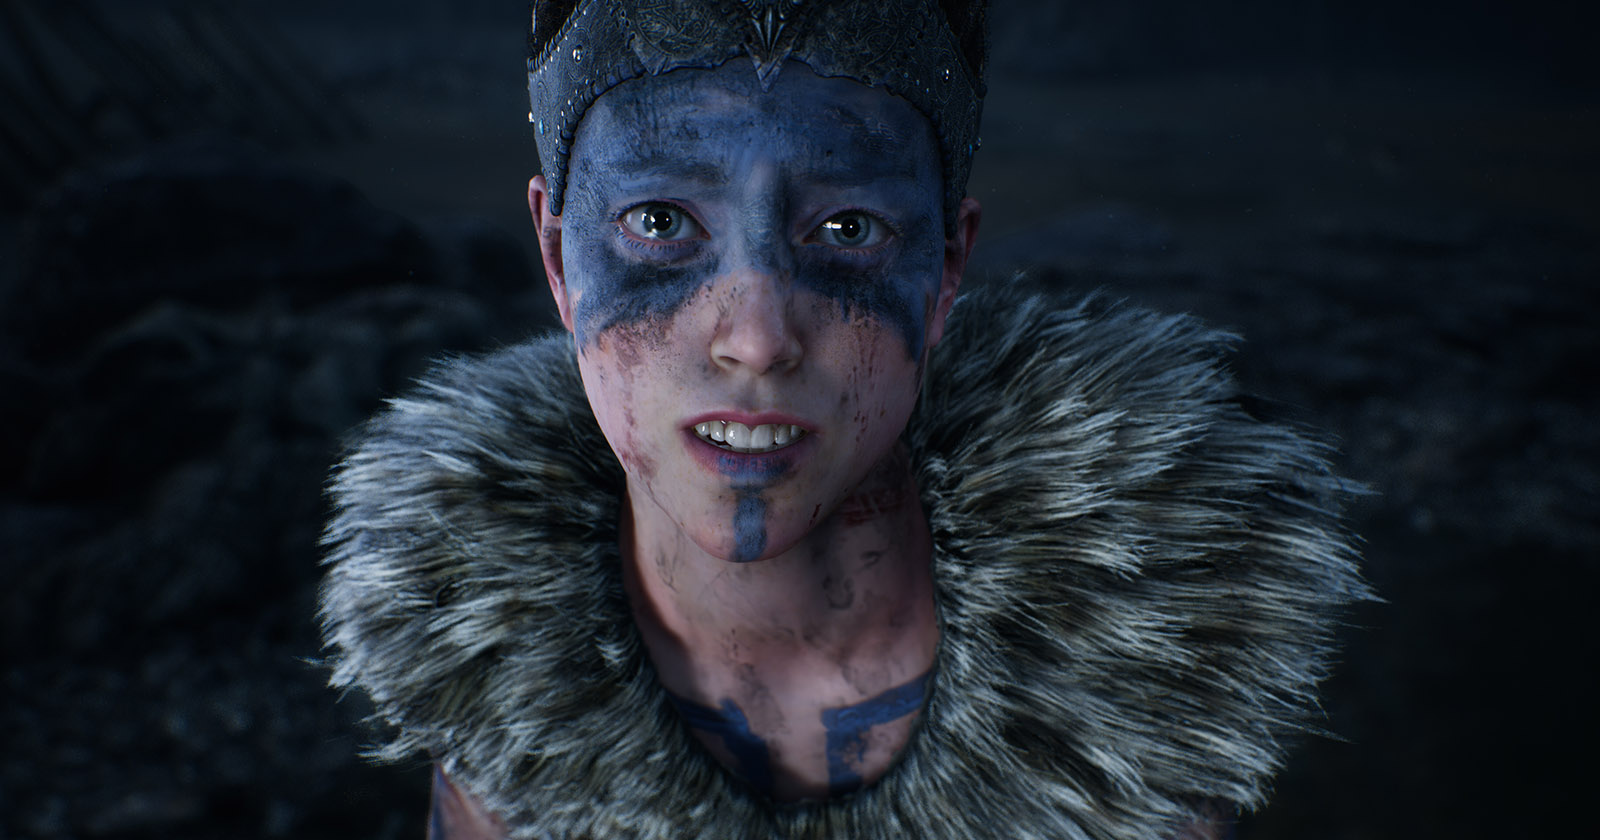 Epic face work with Ninja Theory – fxguide